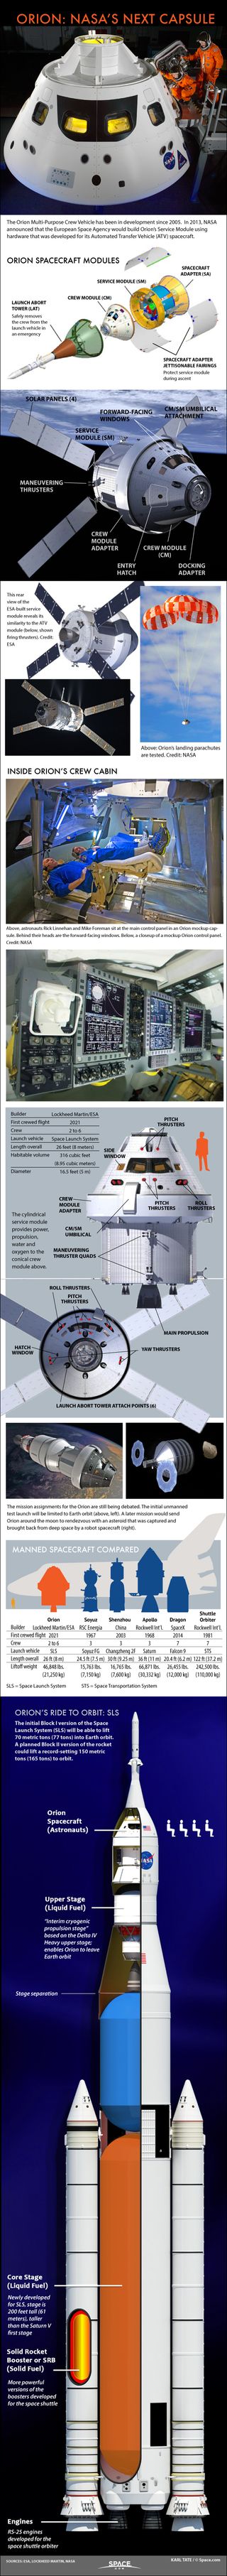 Infographic: Details of the Orion four-person capsule that could carry crews to the Moon or an asteroid, beginning in 2021.